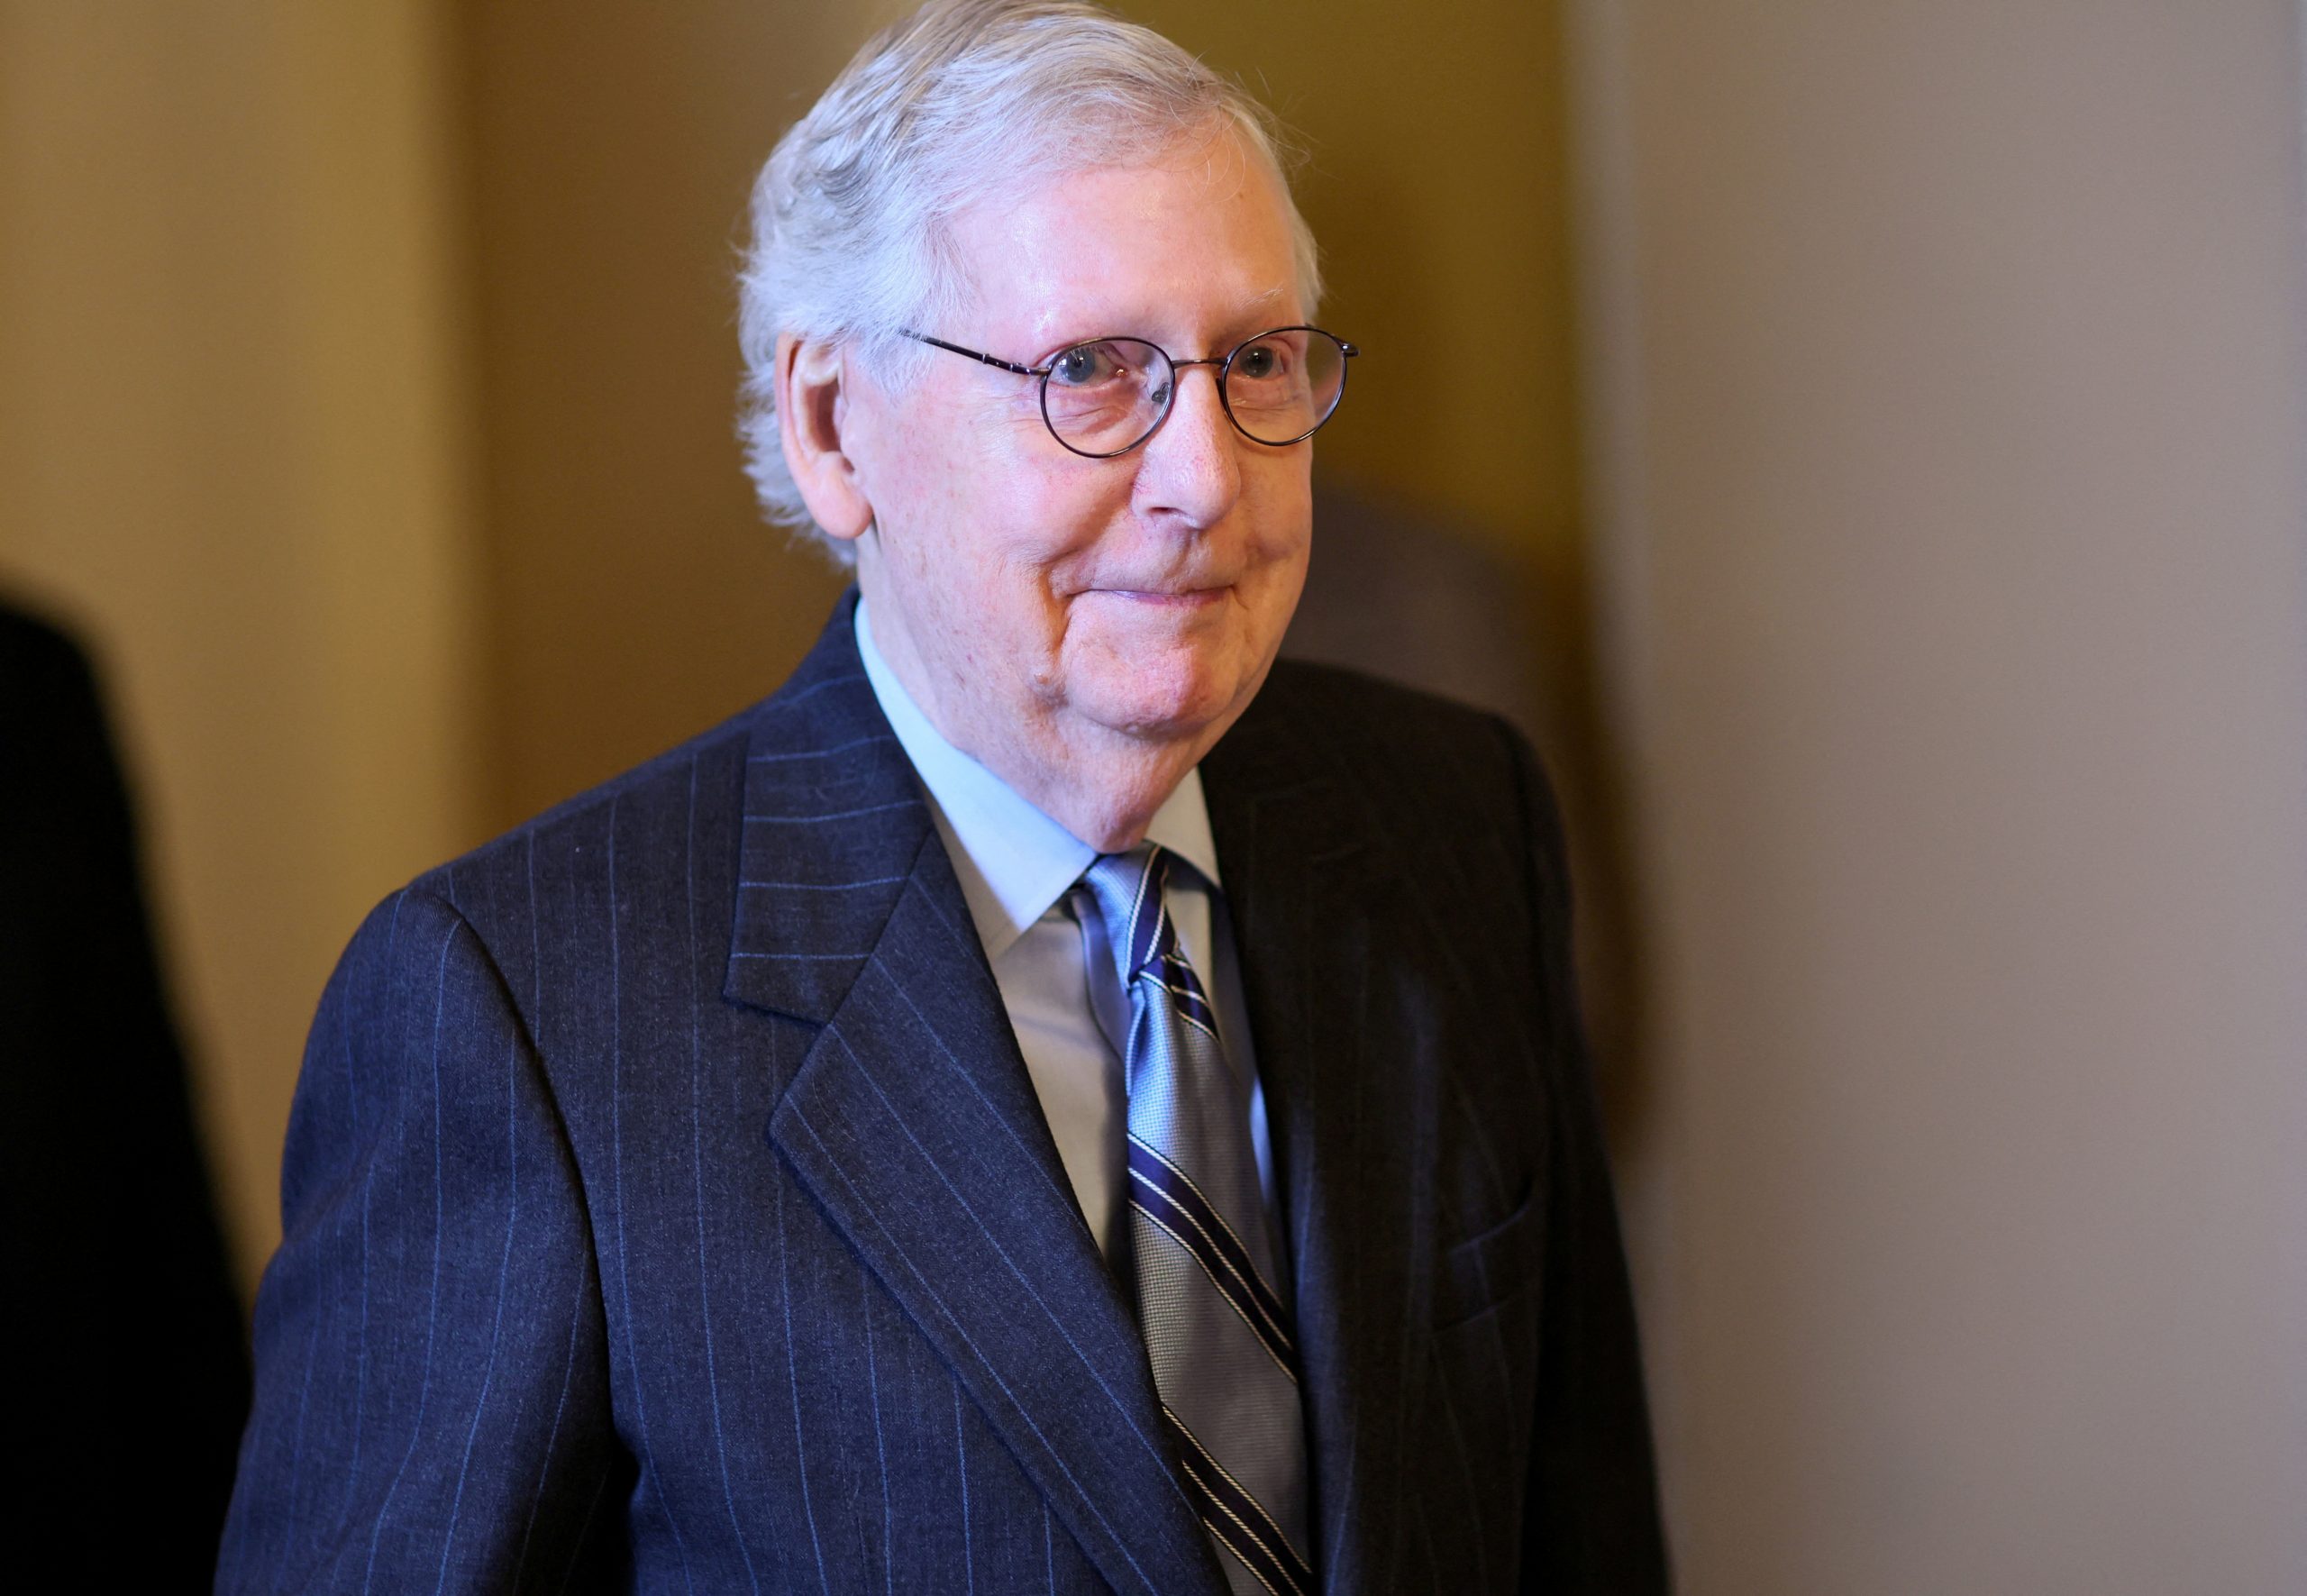 McConnell intends to complete his entire term.